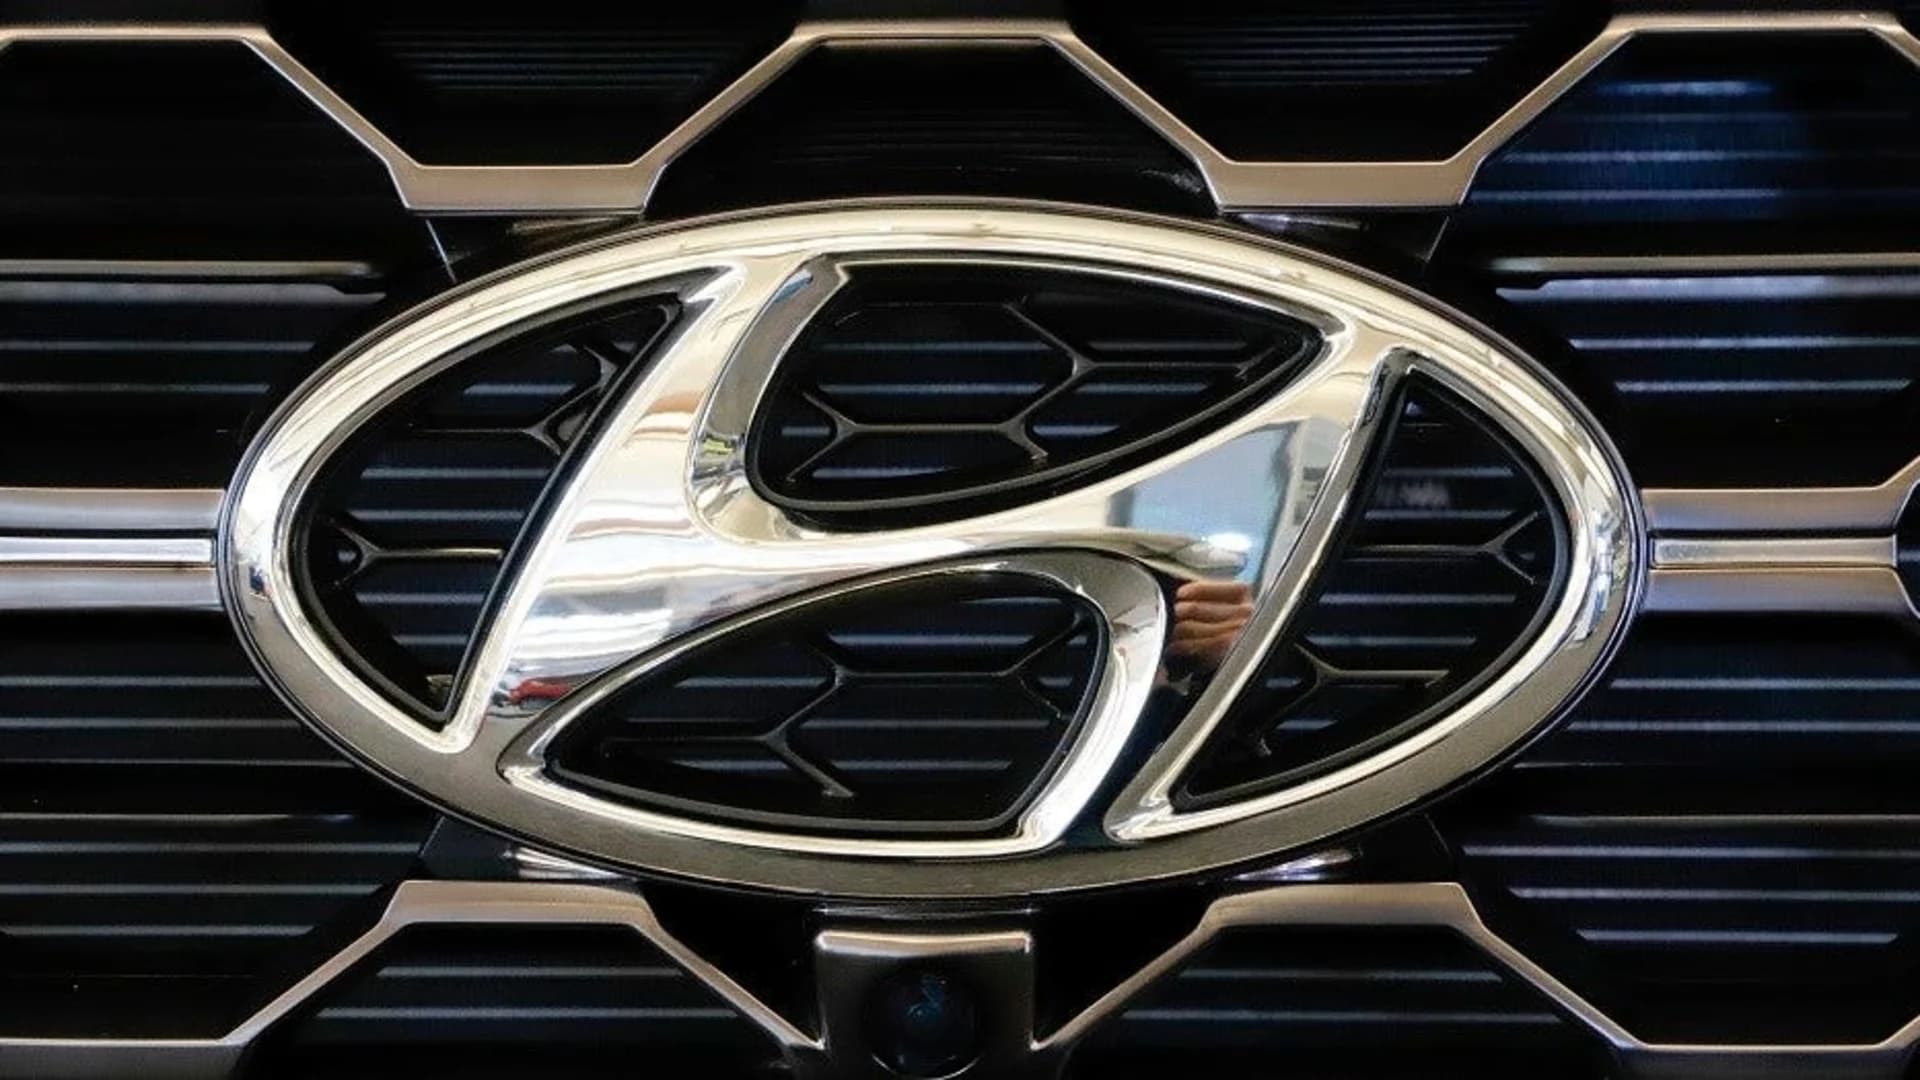 Hyundai recalls cars for problem that can cause engine fires